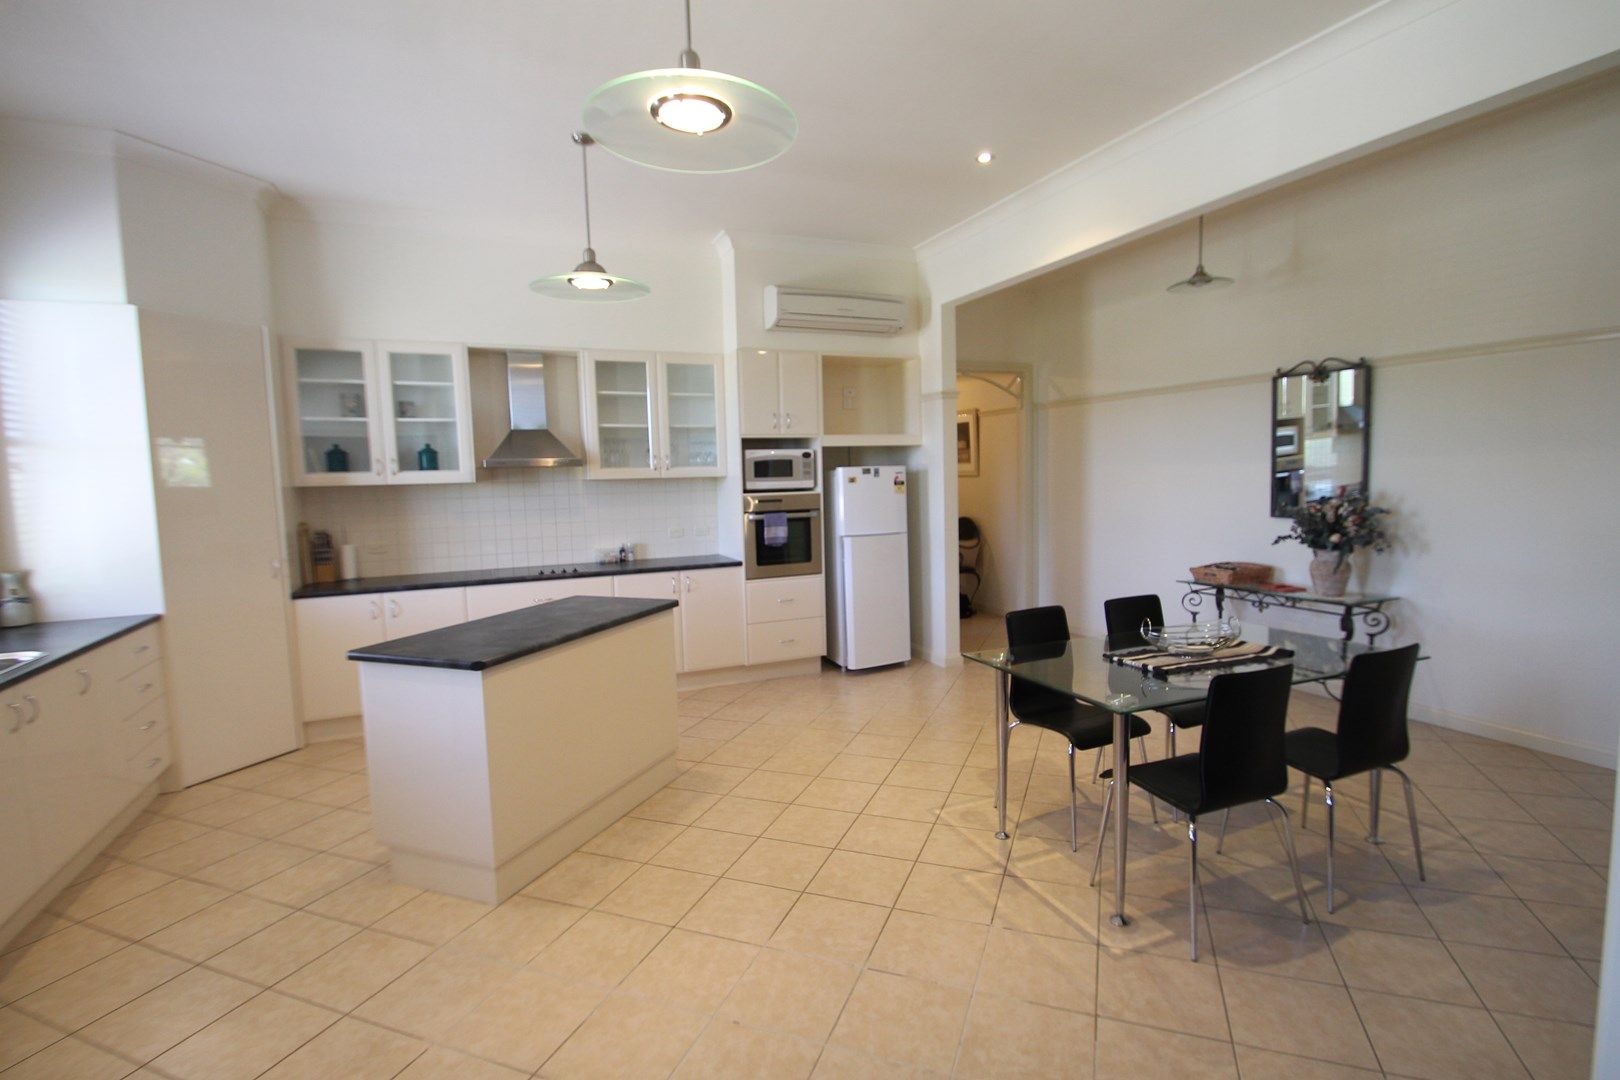 2 bedrooms Apartment / Unit / Flat in Church Street MUDGEE NSW, 2850